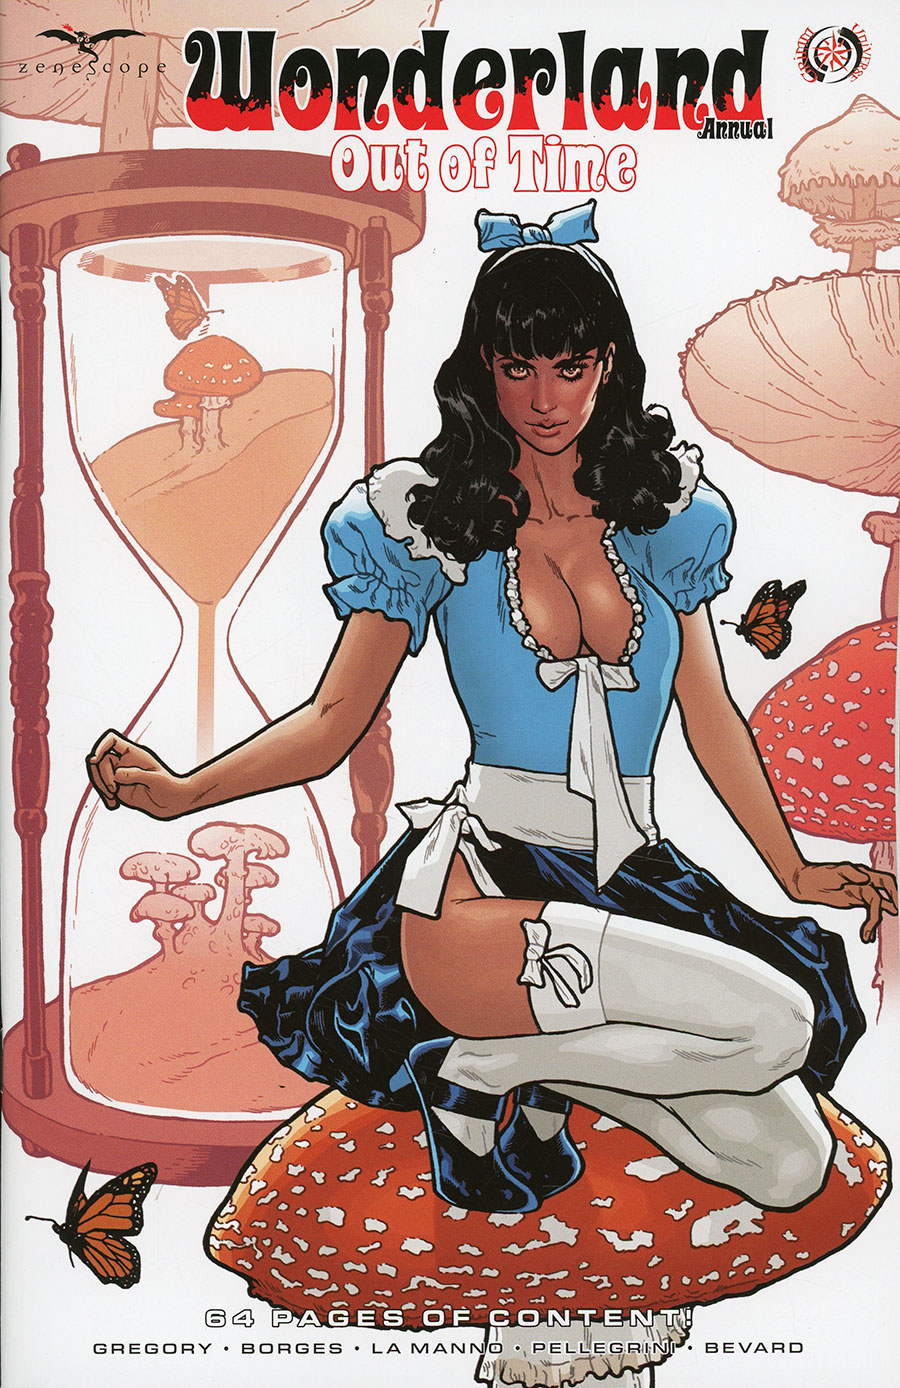 Grimm Fairy Tales Presents Wonderland Annual Out Of Time #1 (One Shot) Cover A Jeff Spokes